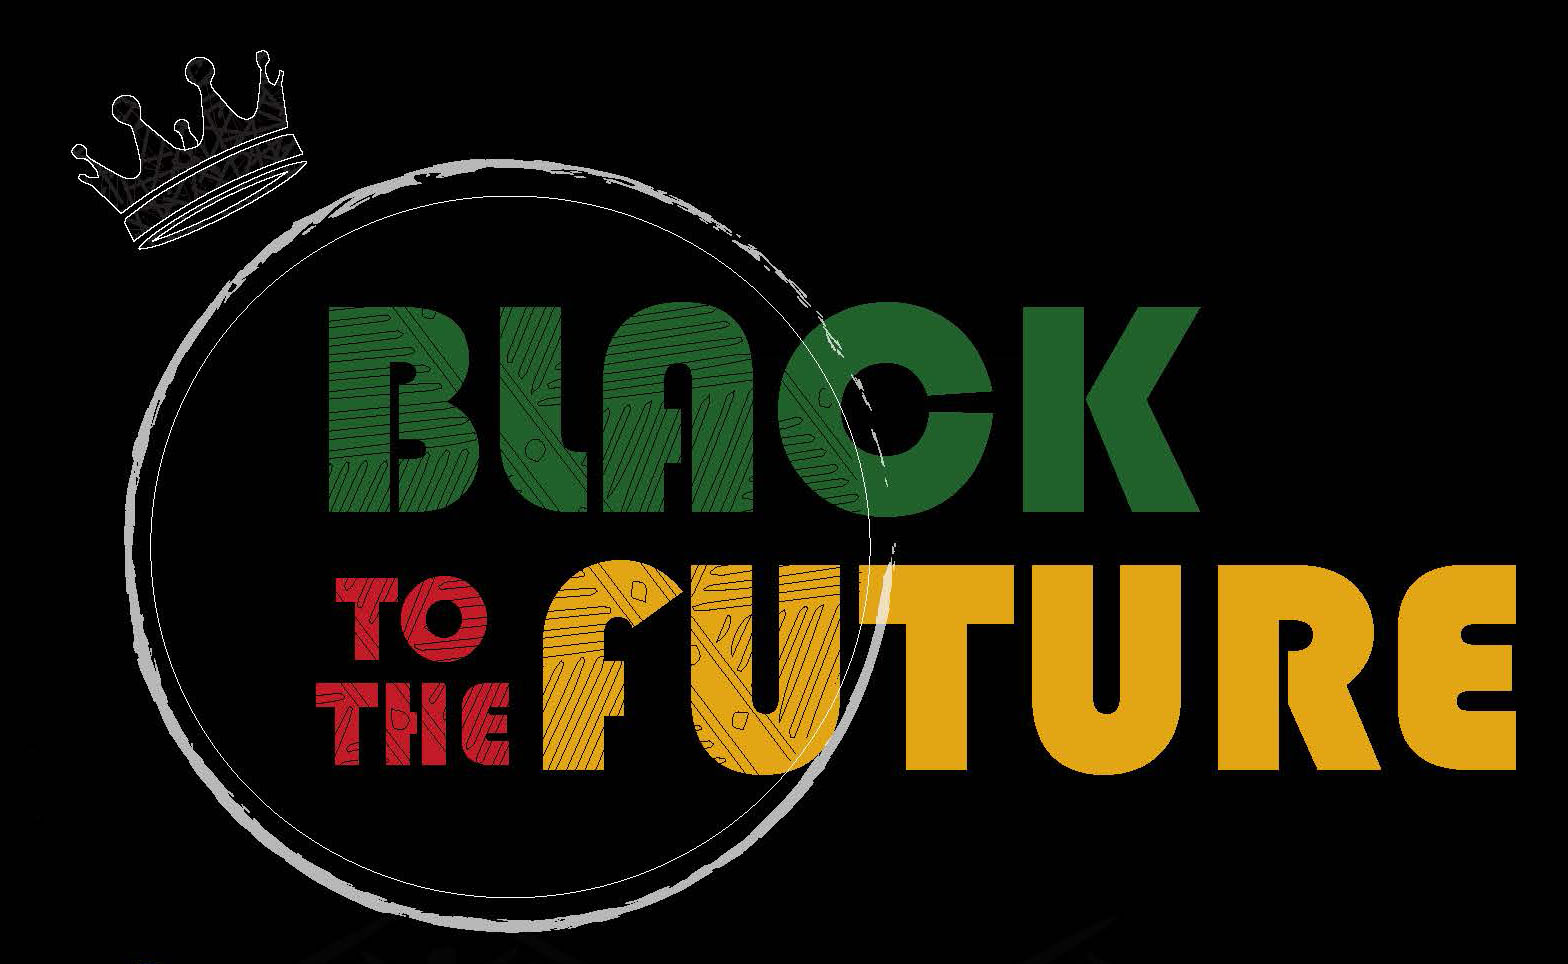 graphic image saying "Black to the Future"